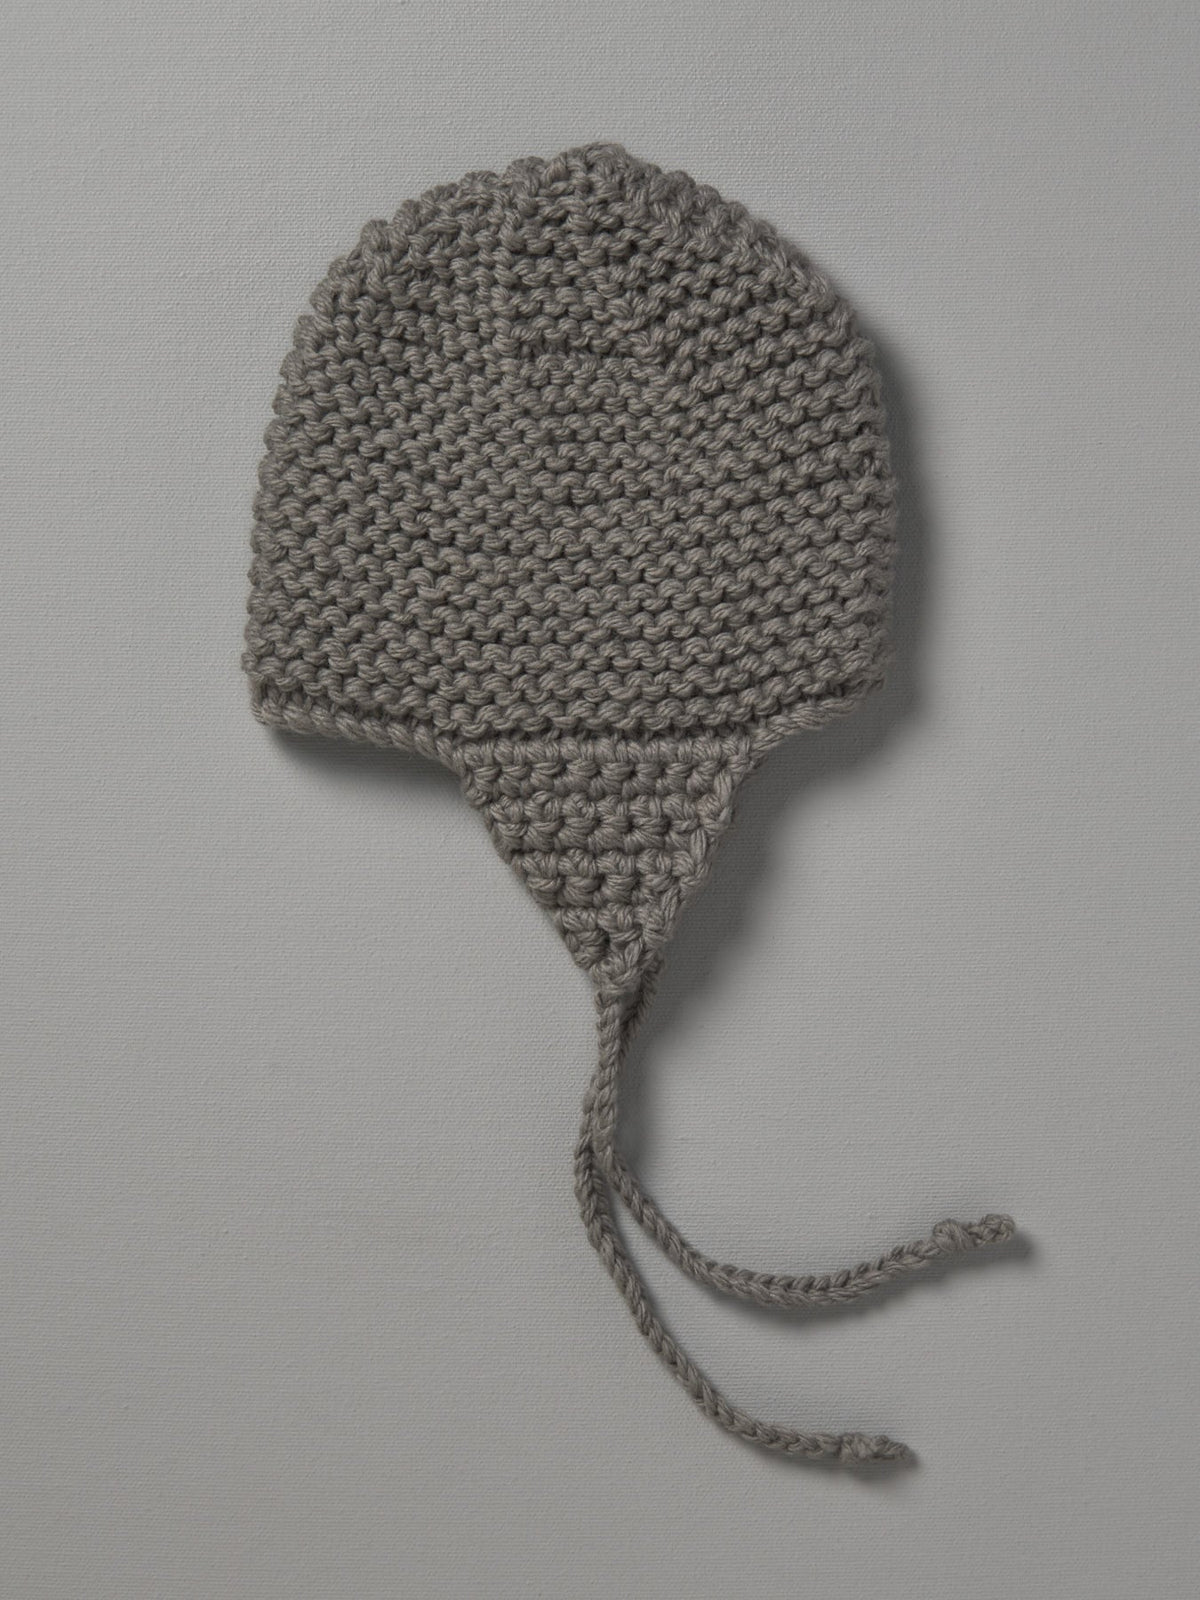 A Hand Knitted Chunky Knit Hat - Mushroom by Weebits on a white background.